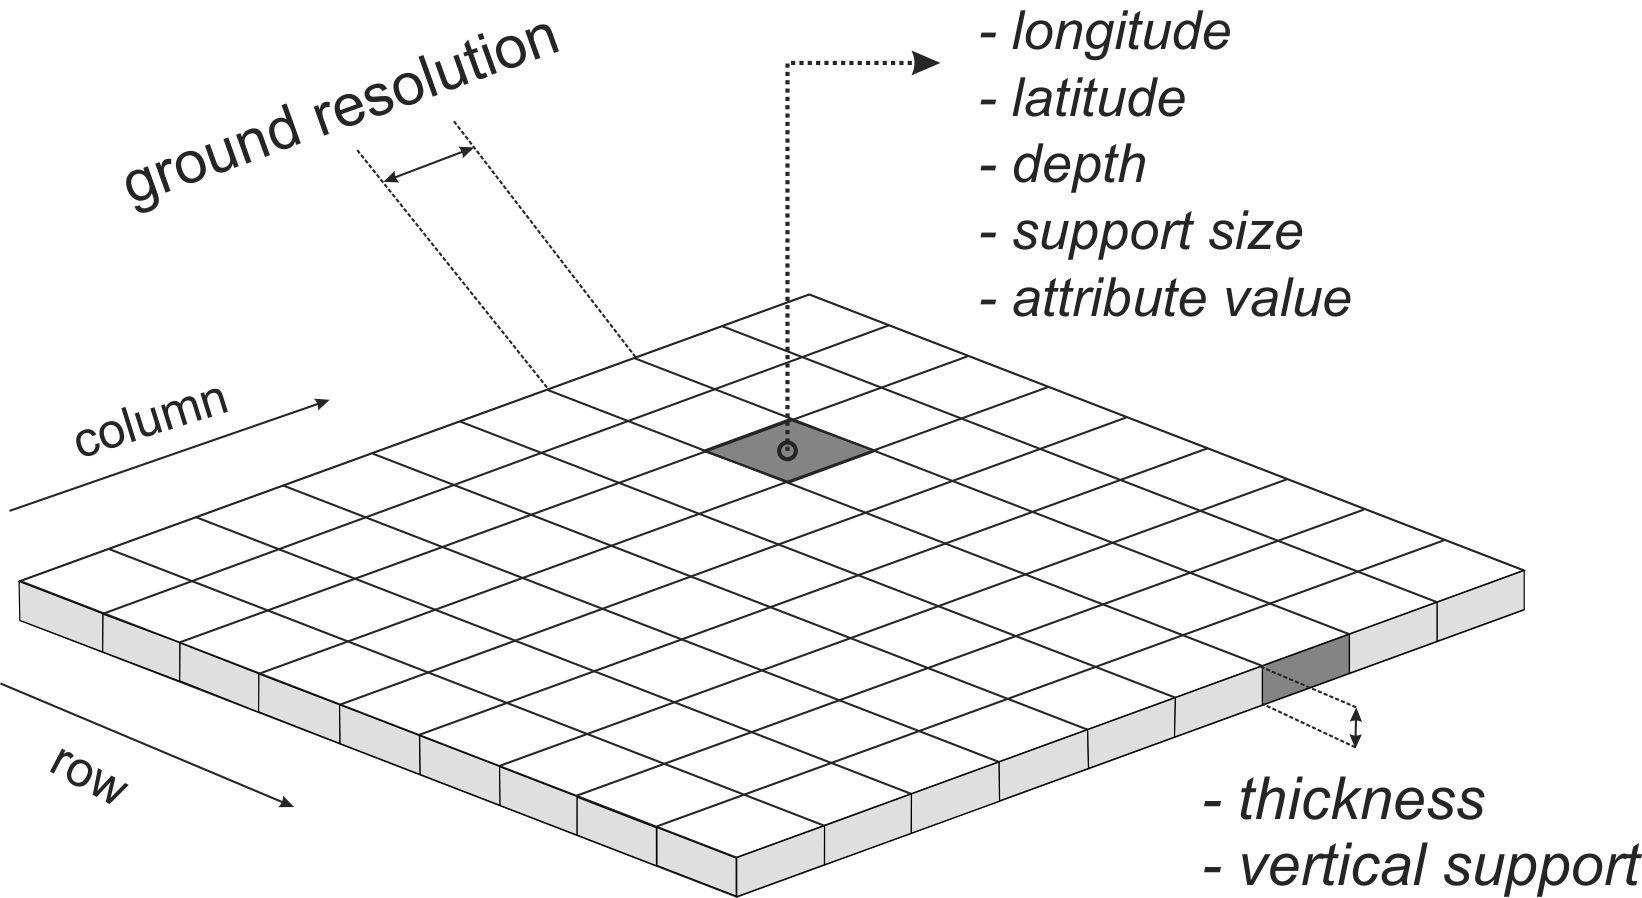 Spatial 3D prediction locations in a gridded system (voxels). In soil mapping, we often predict for larger blocks of land e.g. 100 to 1000 m, but then for vertical depths of few tens of centimeters, so the output voxels might appear in reality as being somewhat disproportional.